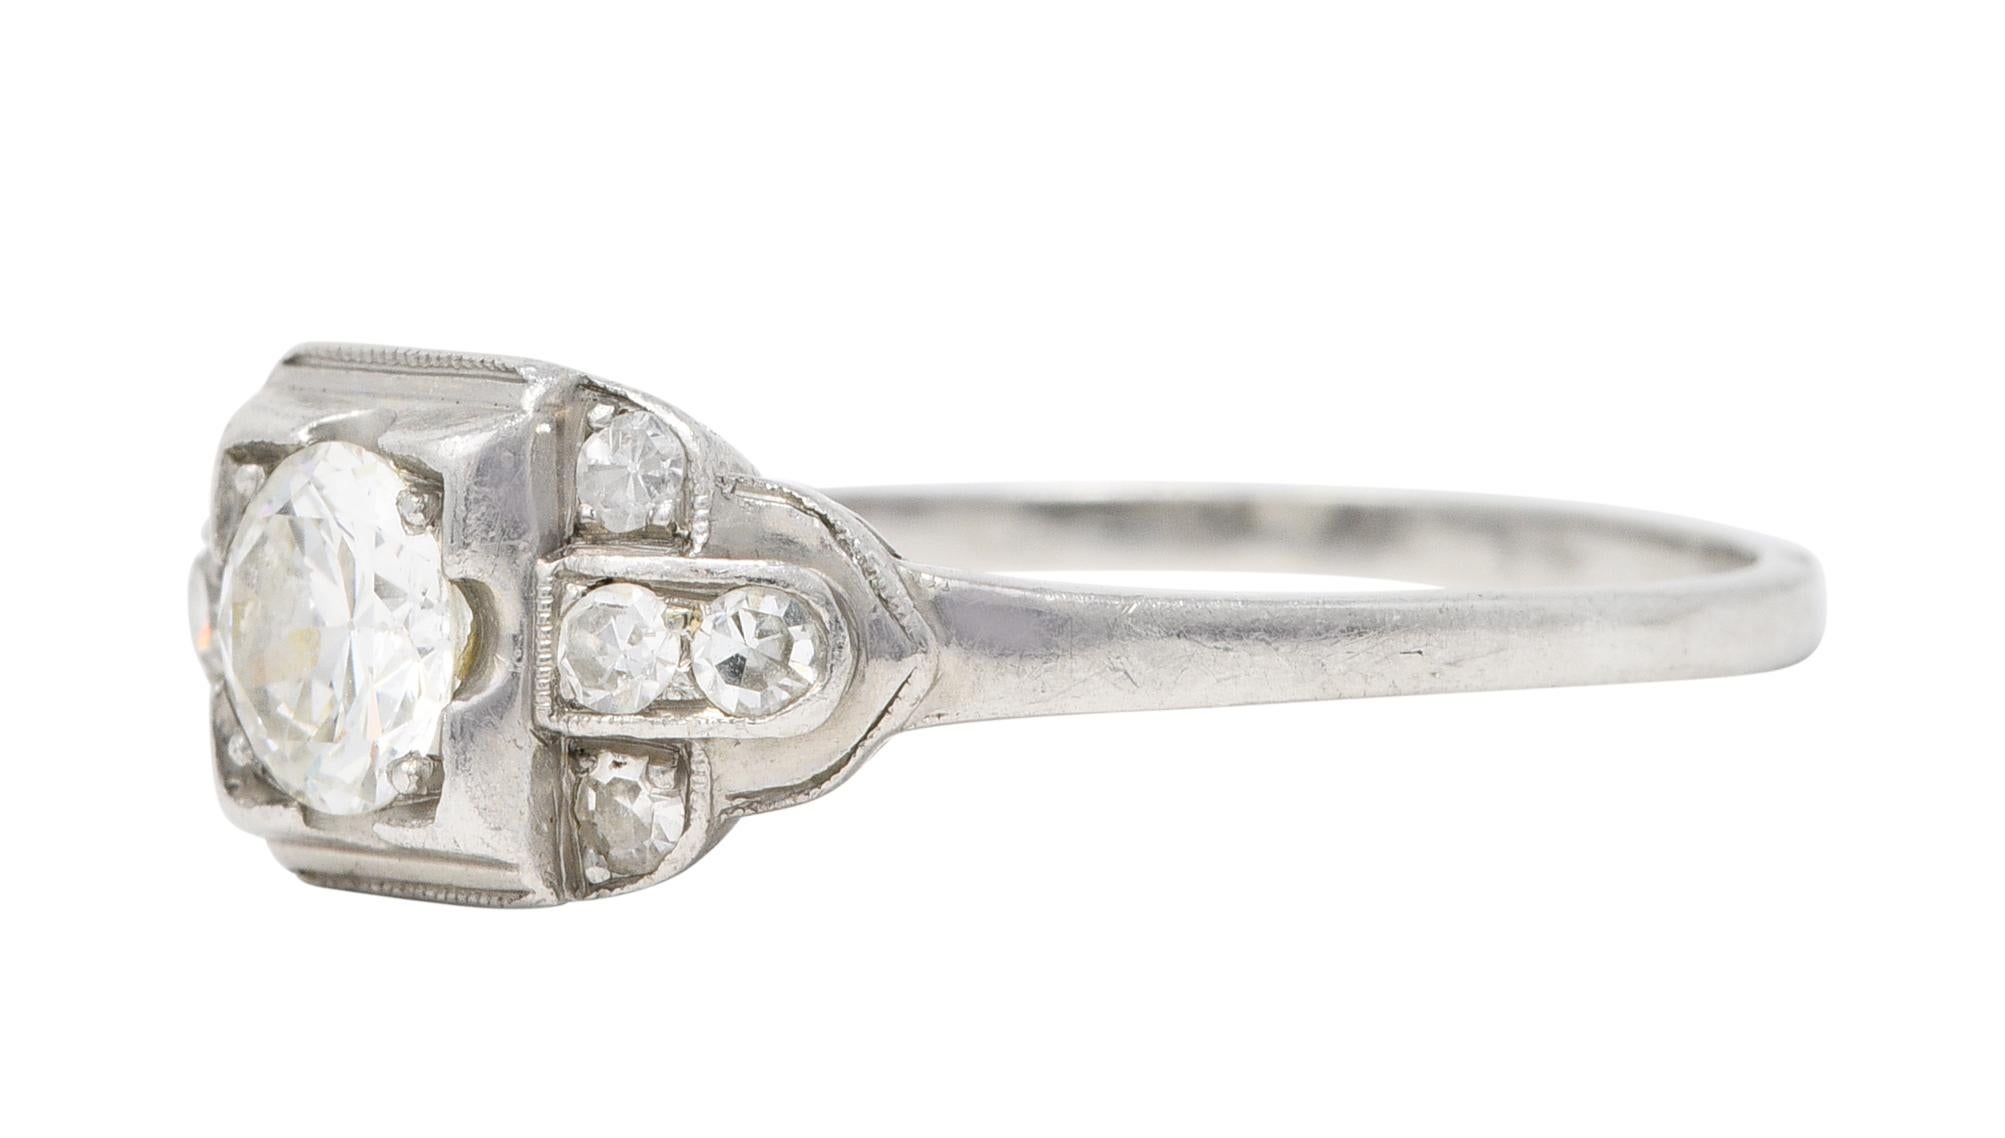 Centering a transitional cut diamond weighing approximately 0.45 carat - H/I with VS clarity

Set low in a square form head in an East/West mounting designed as a buckle motif

Accented by single cut diamonds weighing in total approximately 0.20